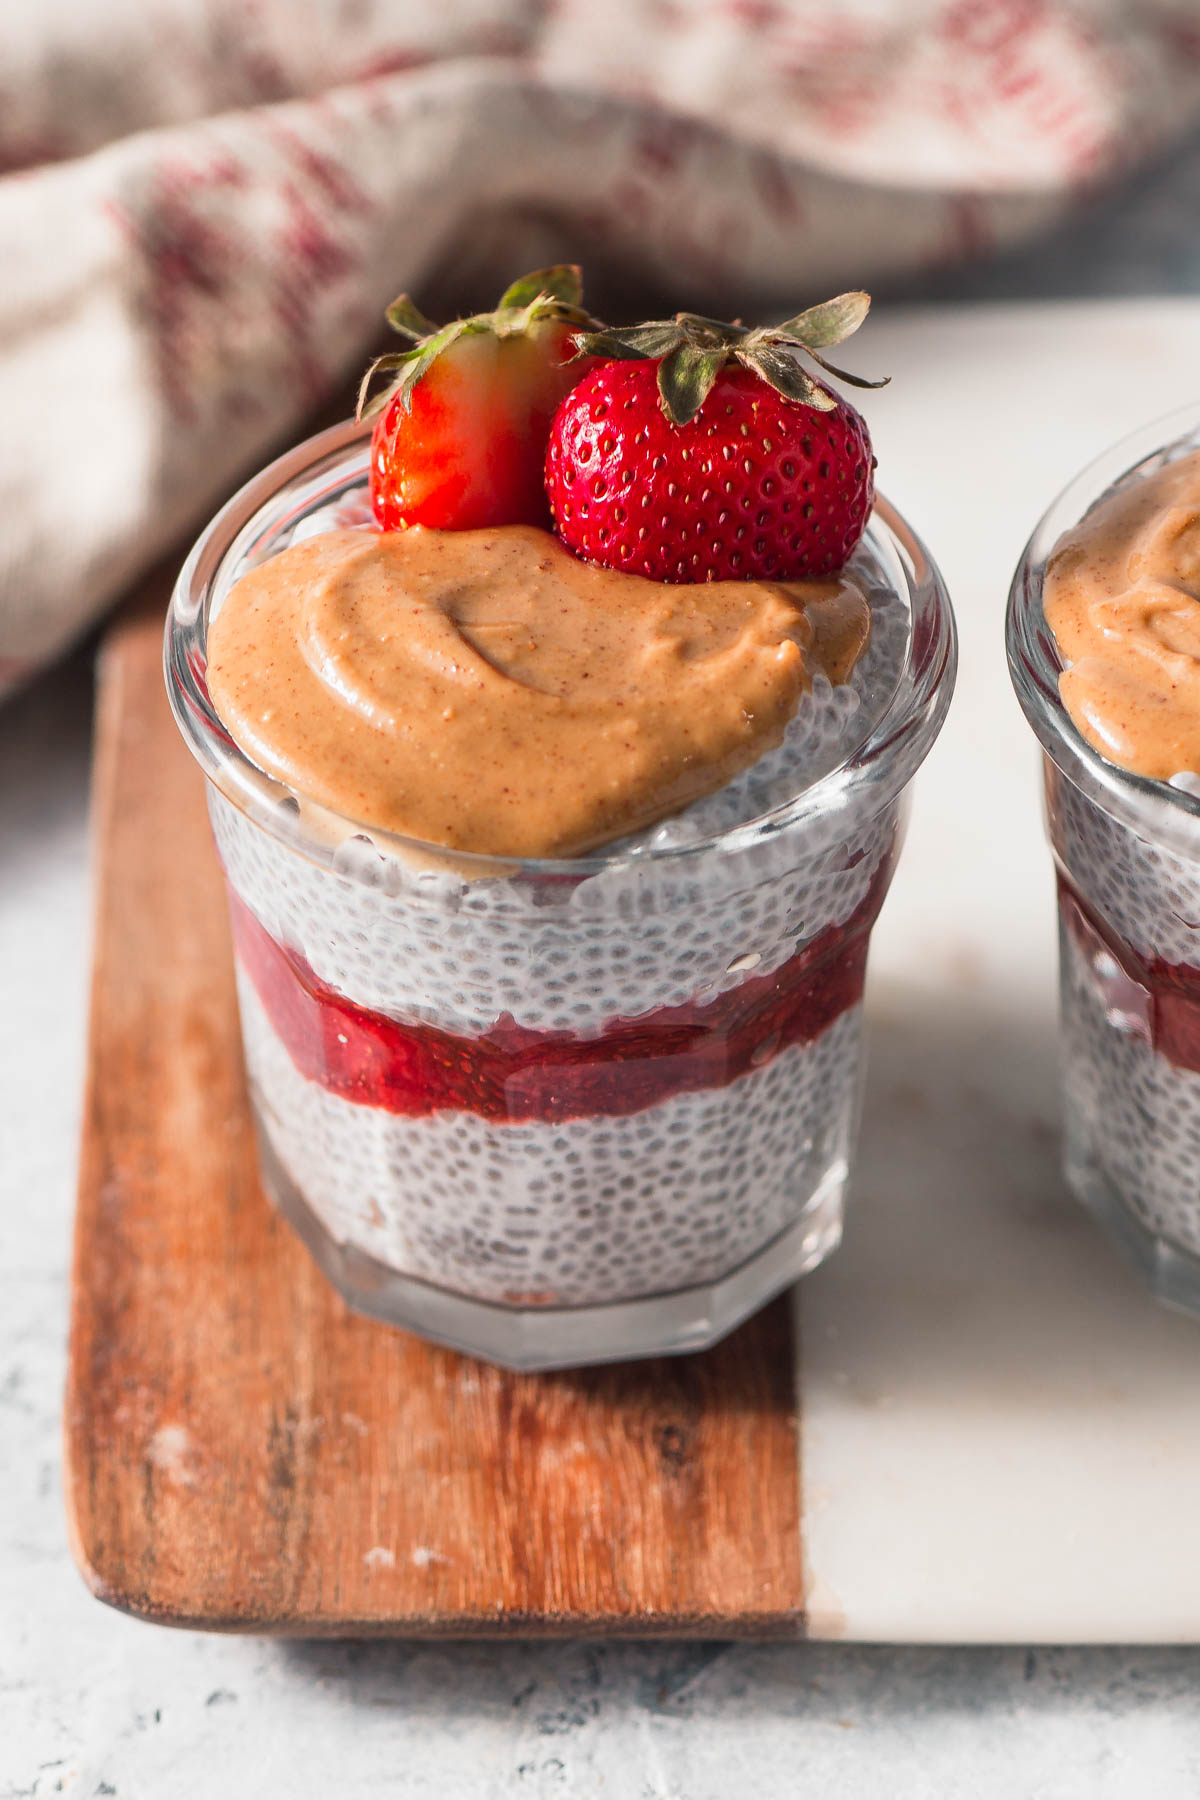 Keto chia pudding served in a jar with peanut butter and strawberry jam